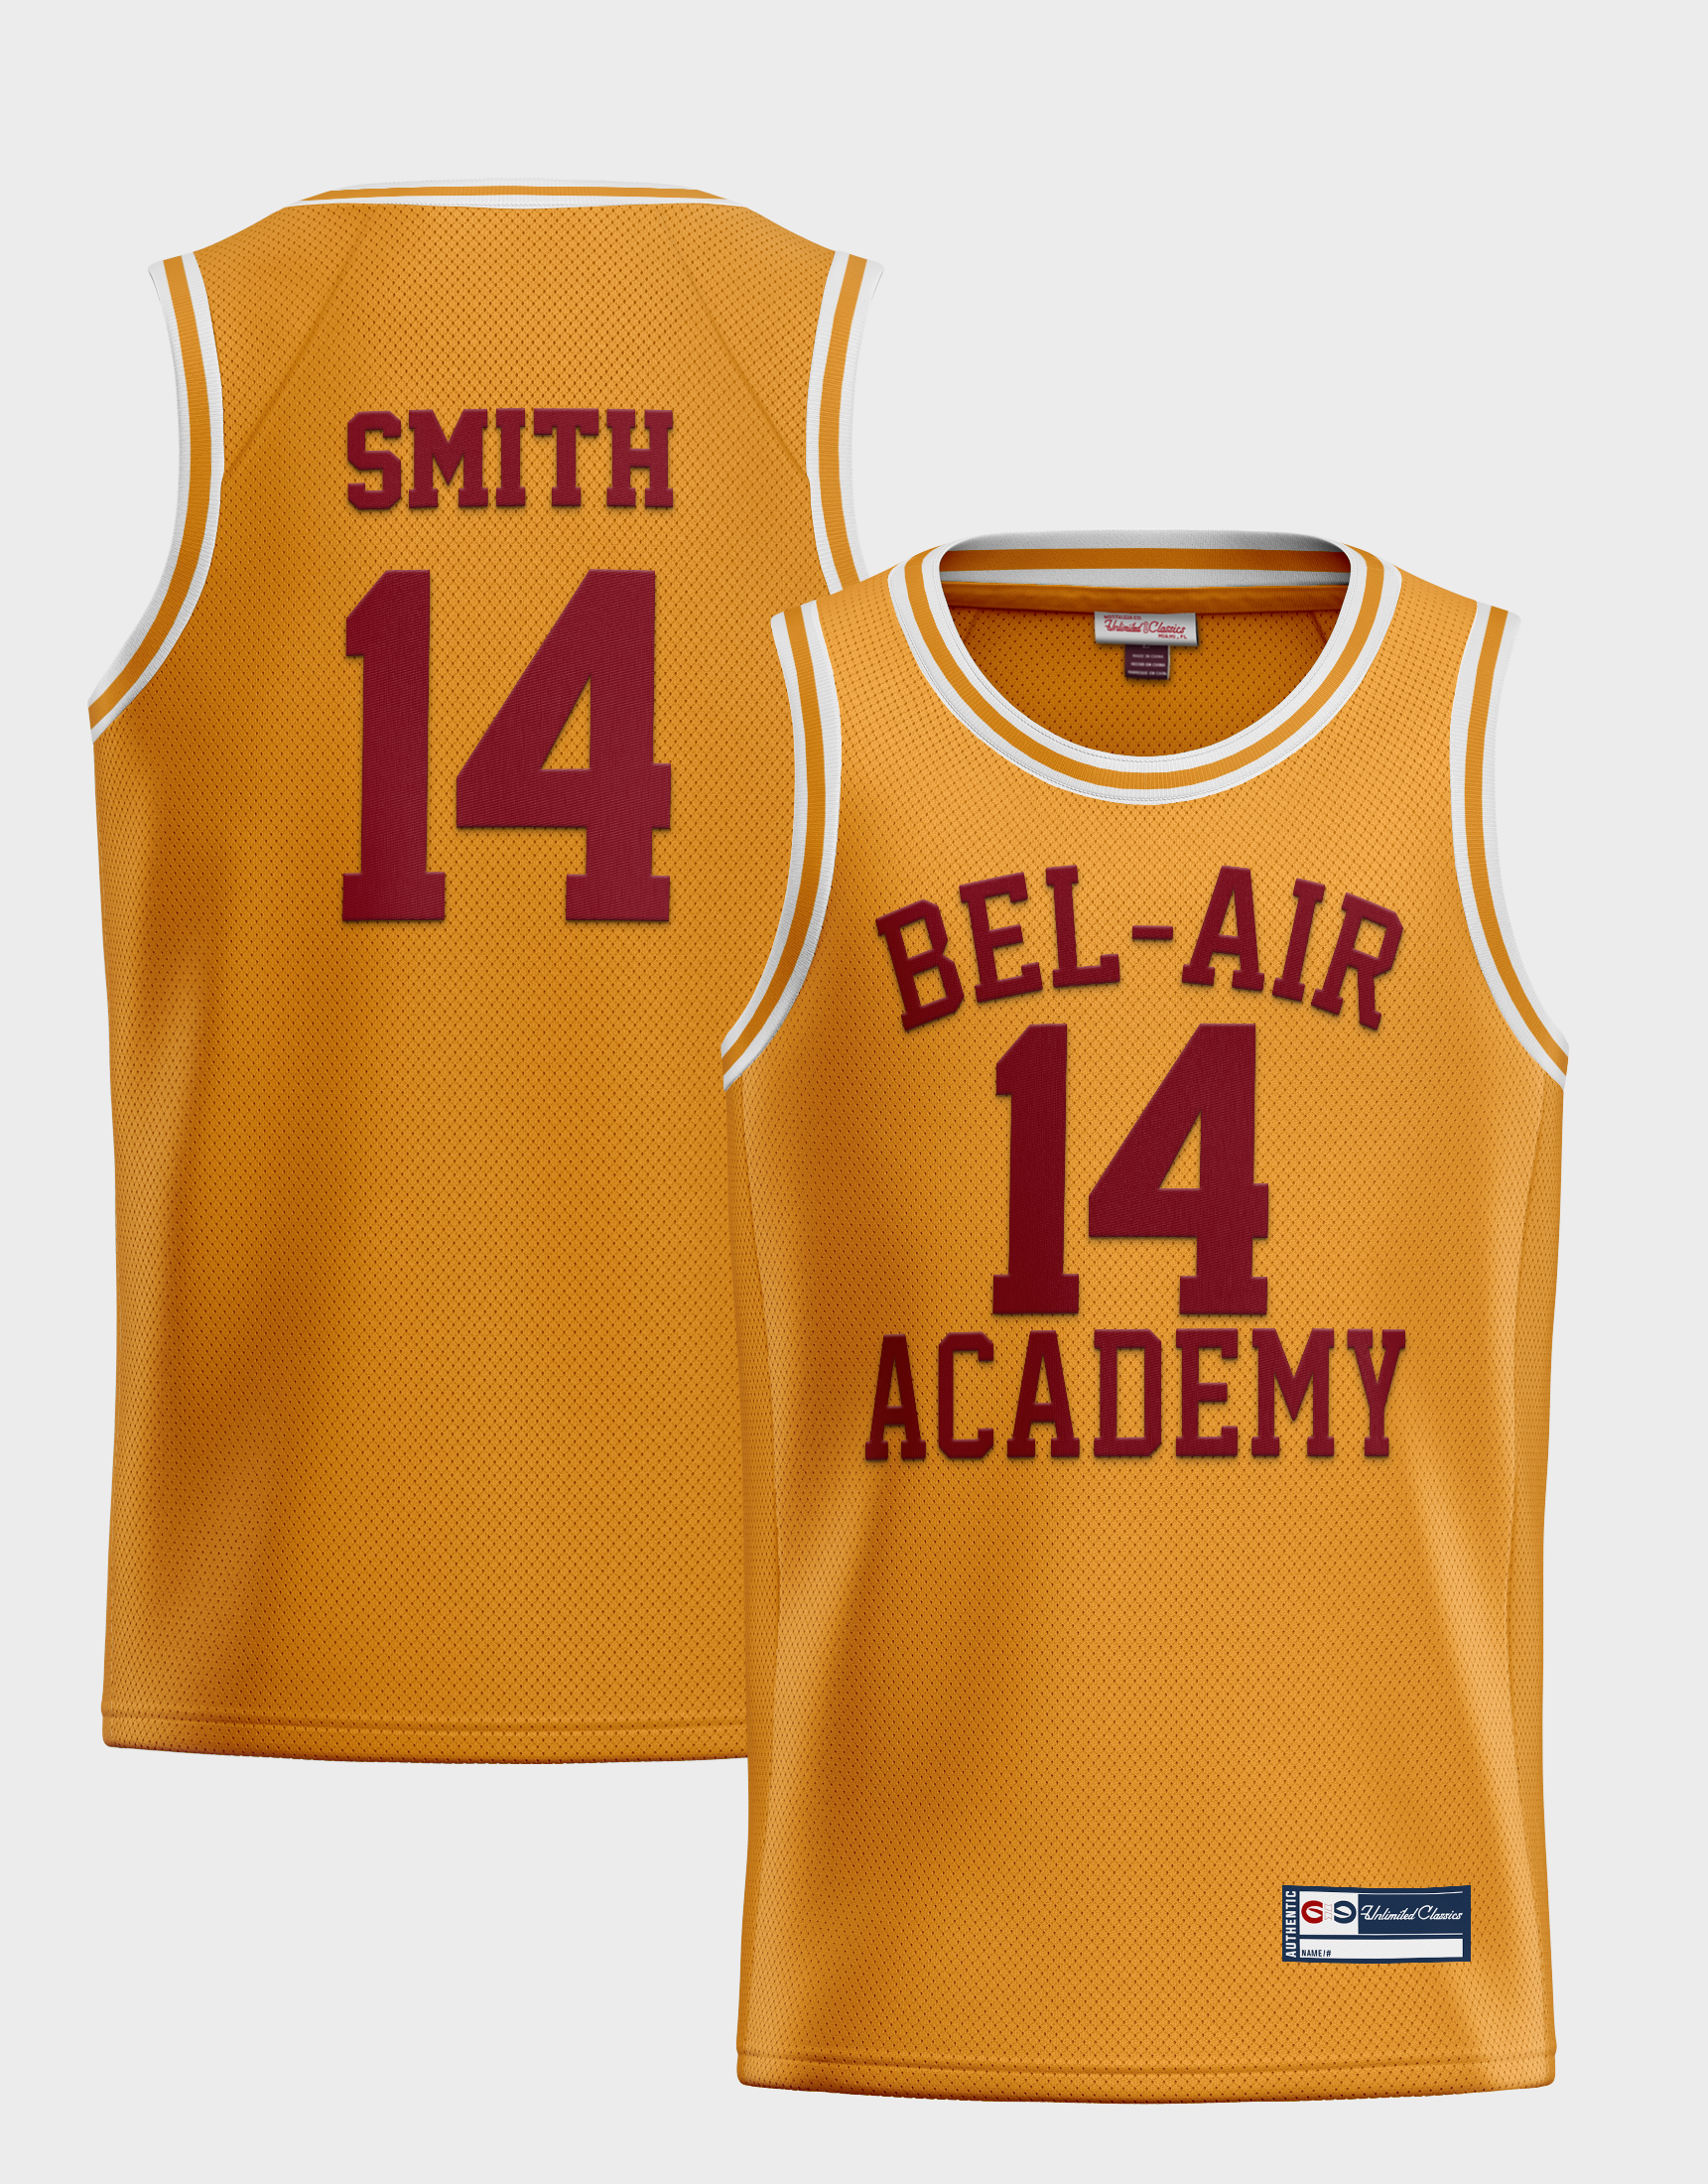 Youth Will Smith #14 Bel-Air Academy Basketball Jersey – 99Jersey®: Your  Ultimate Destination for Unique Jerseys, Shorts, and More